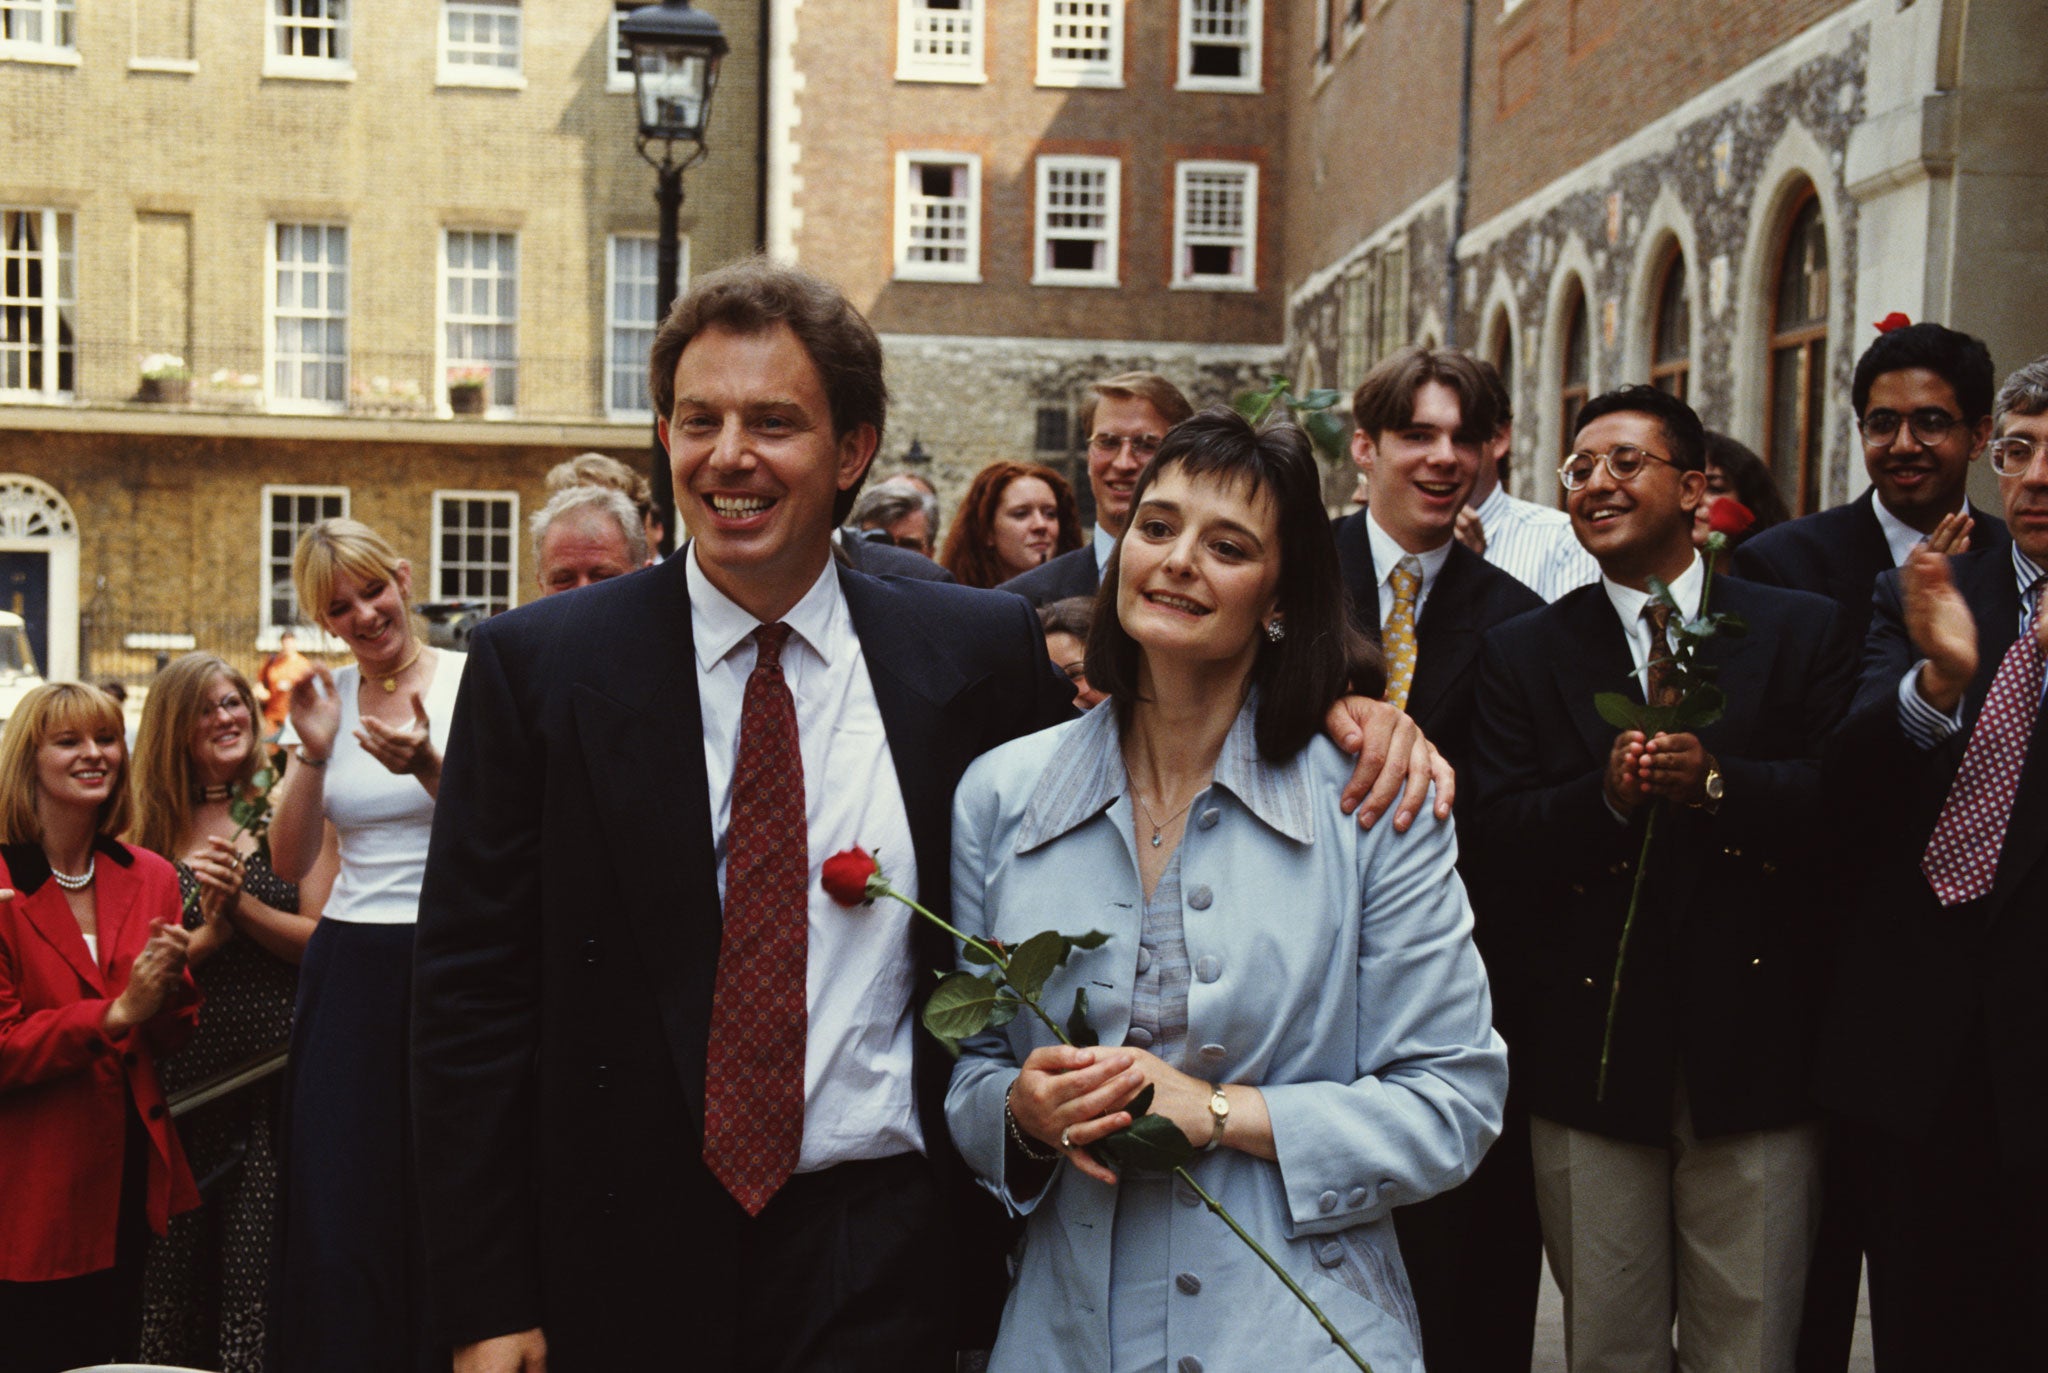 Tony Blair beat Margaret Beckett and who else in the 1994 Labour leadership election?